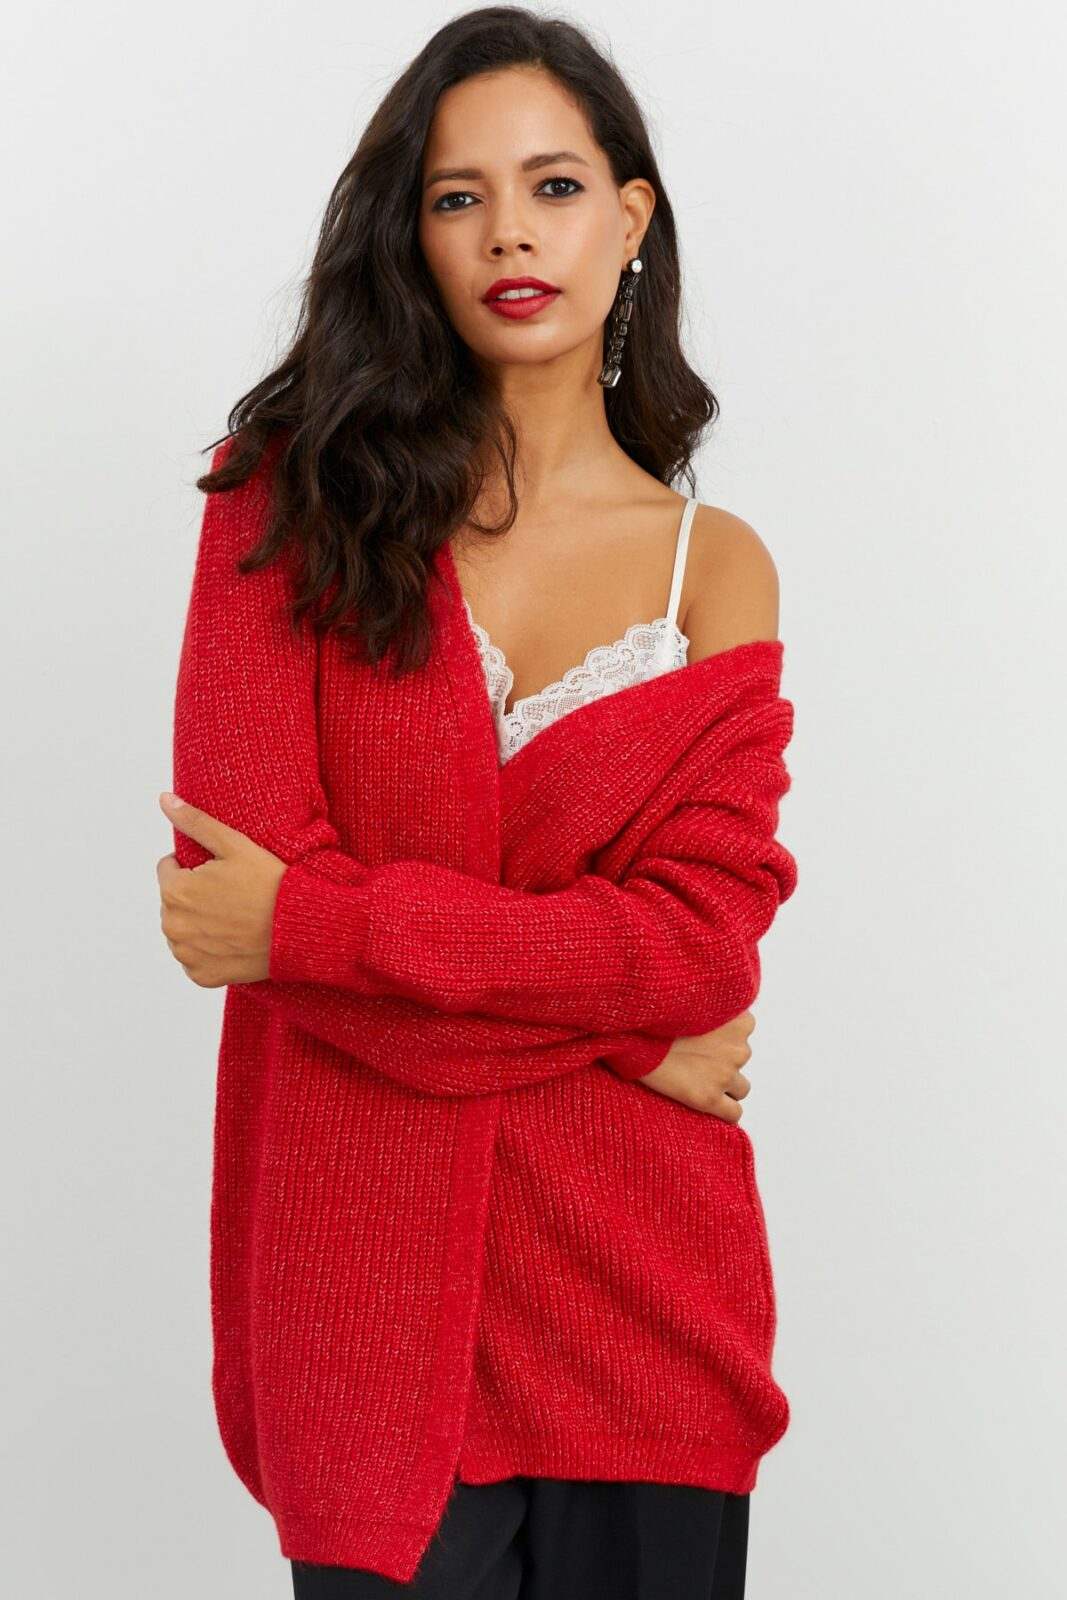 Cool & Sexy Cardigan - Red